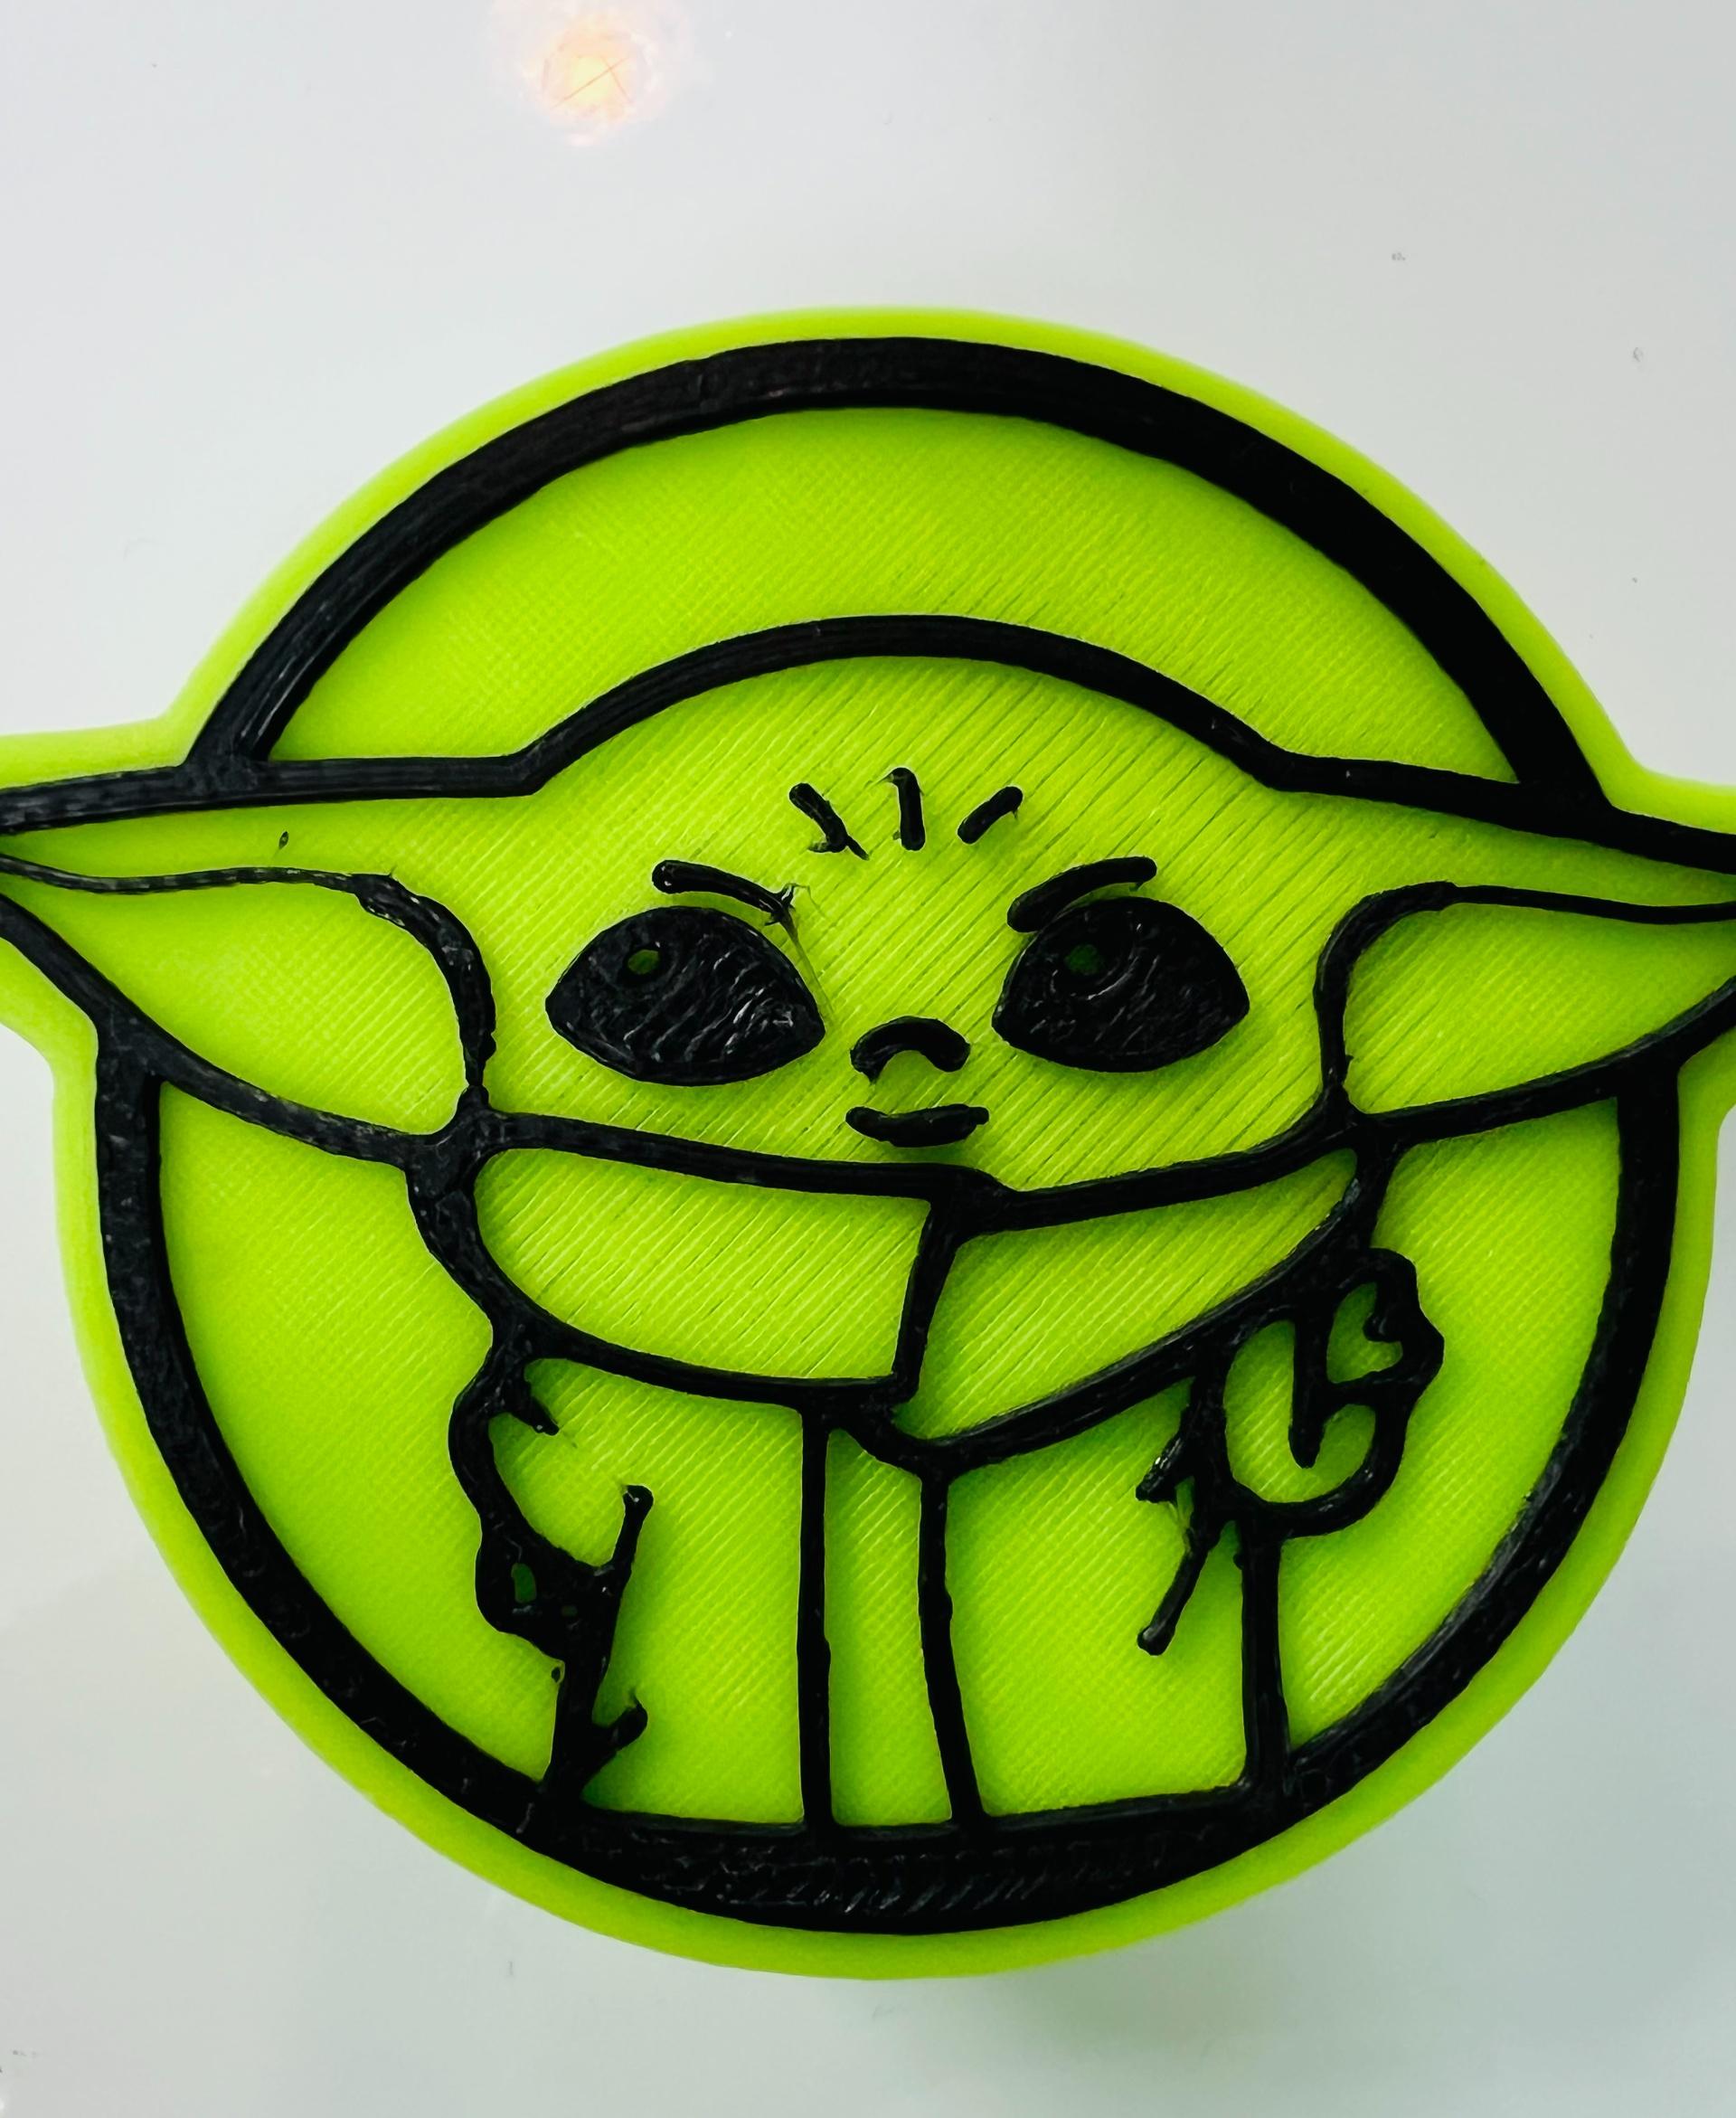 Baby Yoda Box - Still learning, so could be cleaner.  Easy make though - 3d model